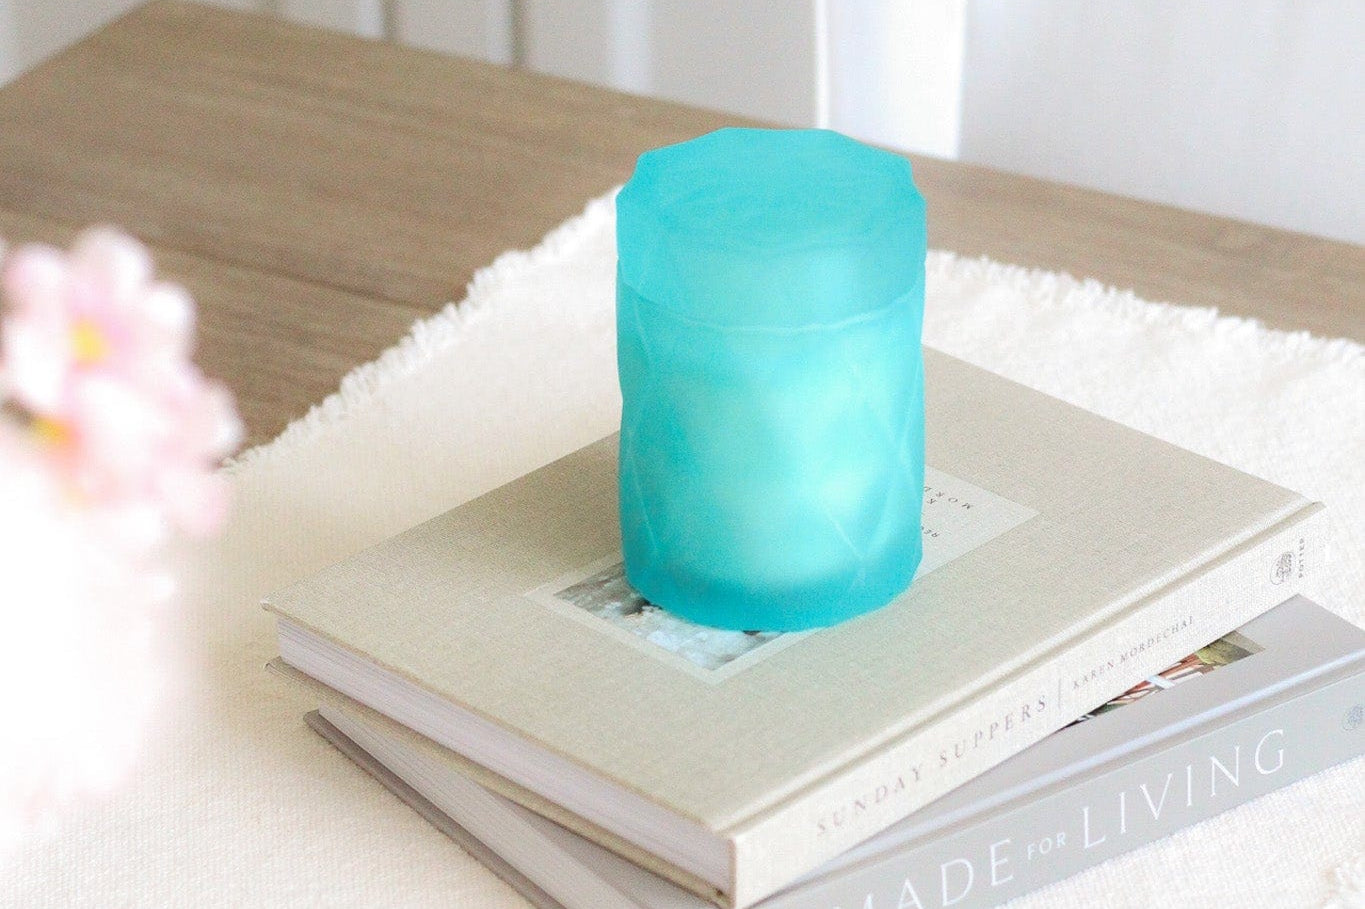 light teal color glass candle jar on home decor coffee table books on kitchen table